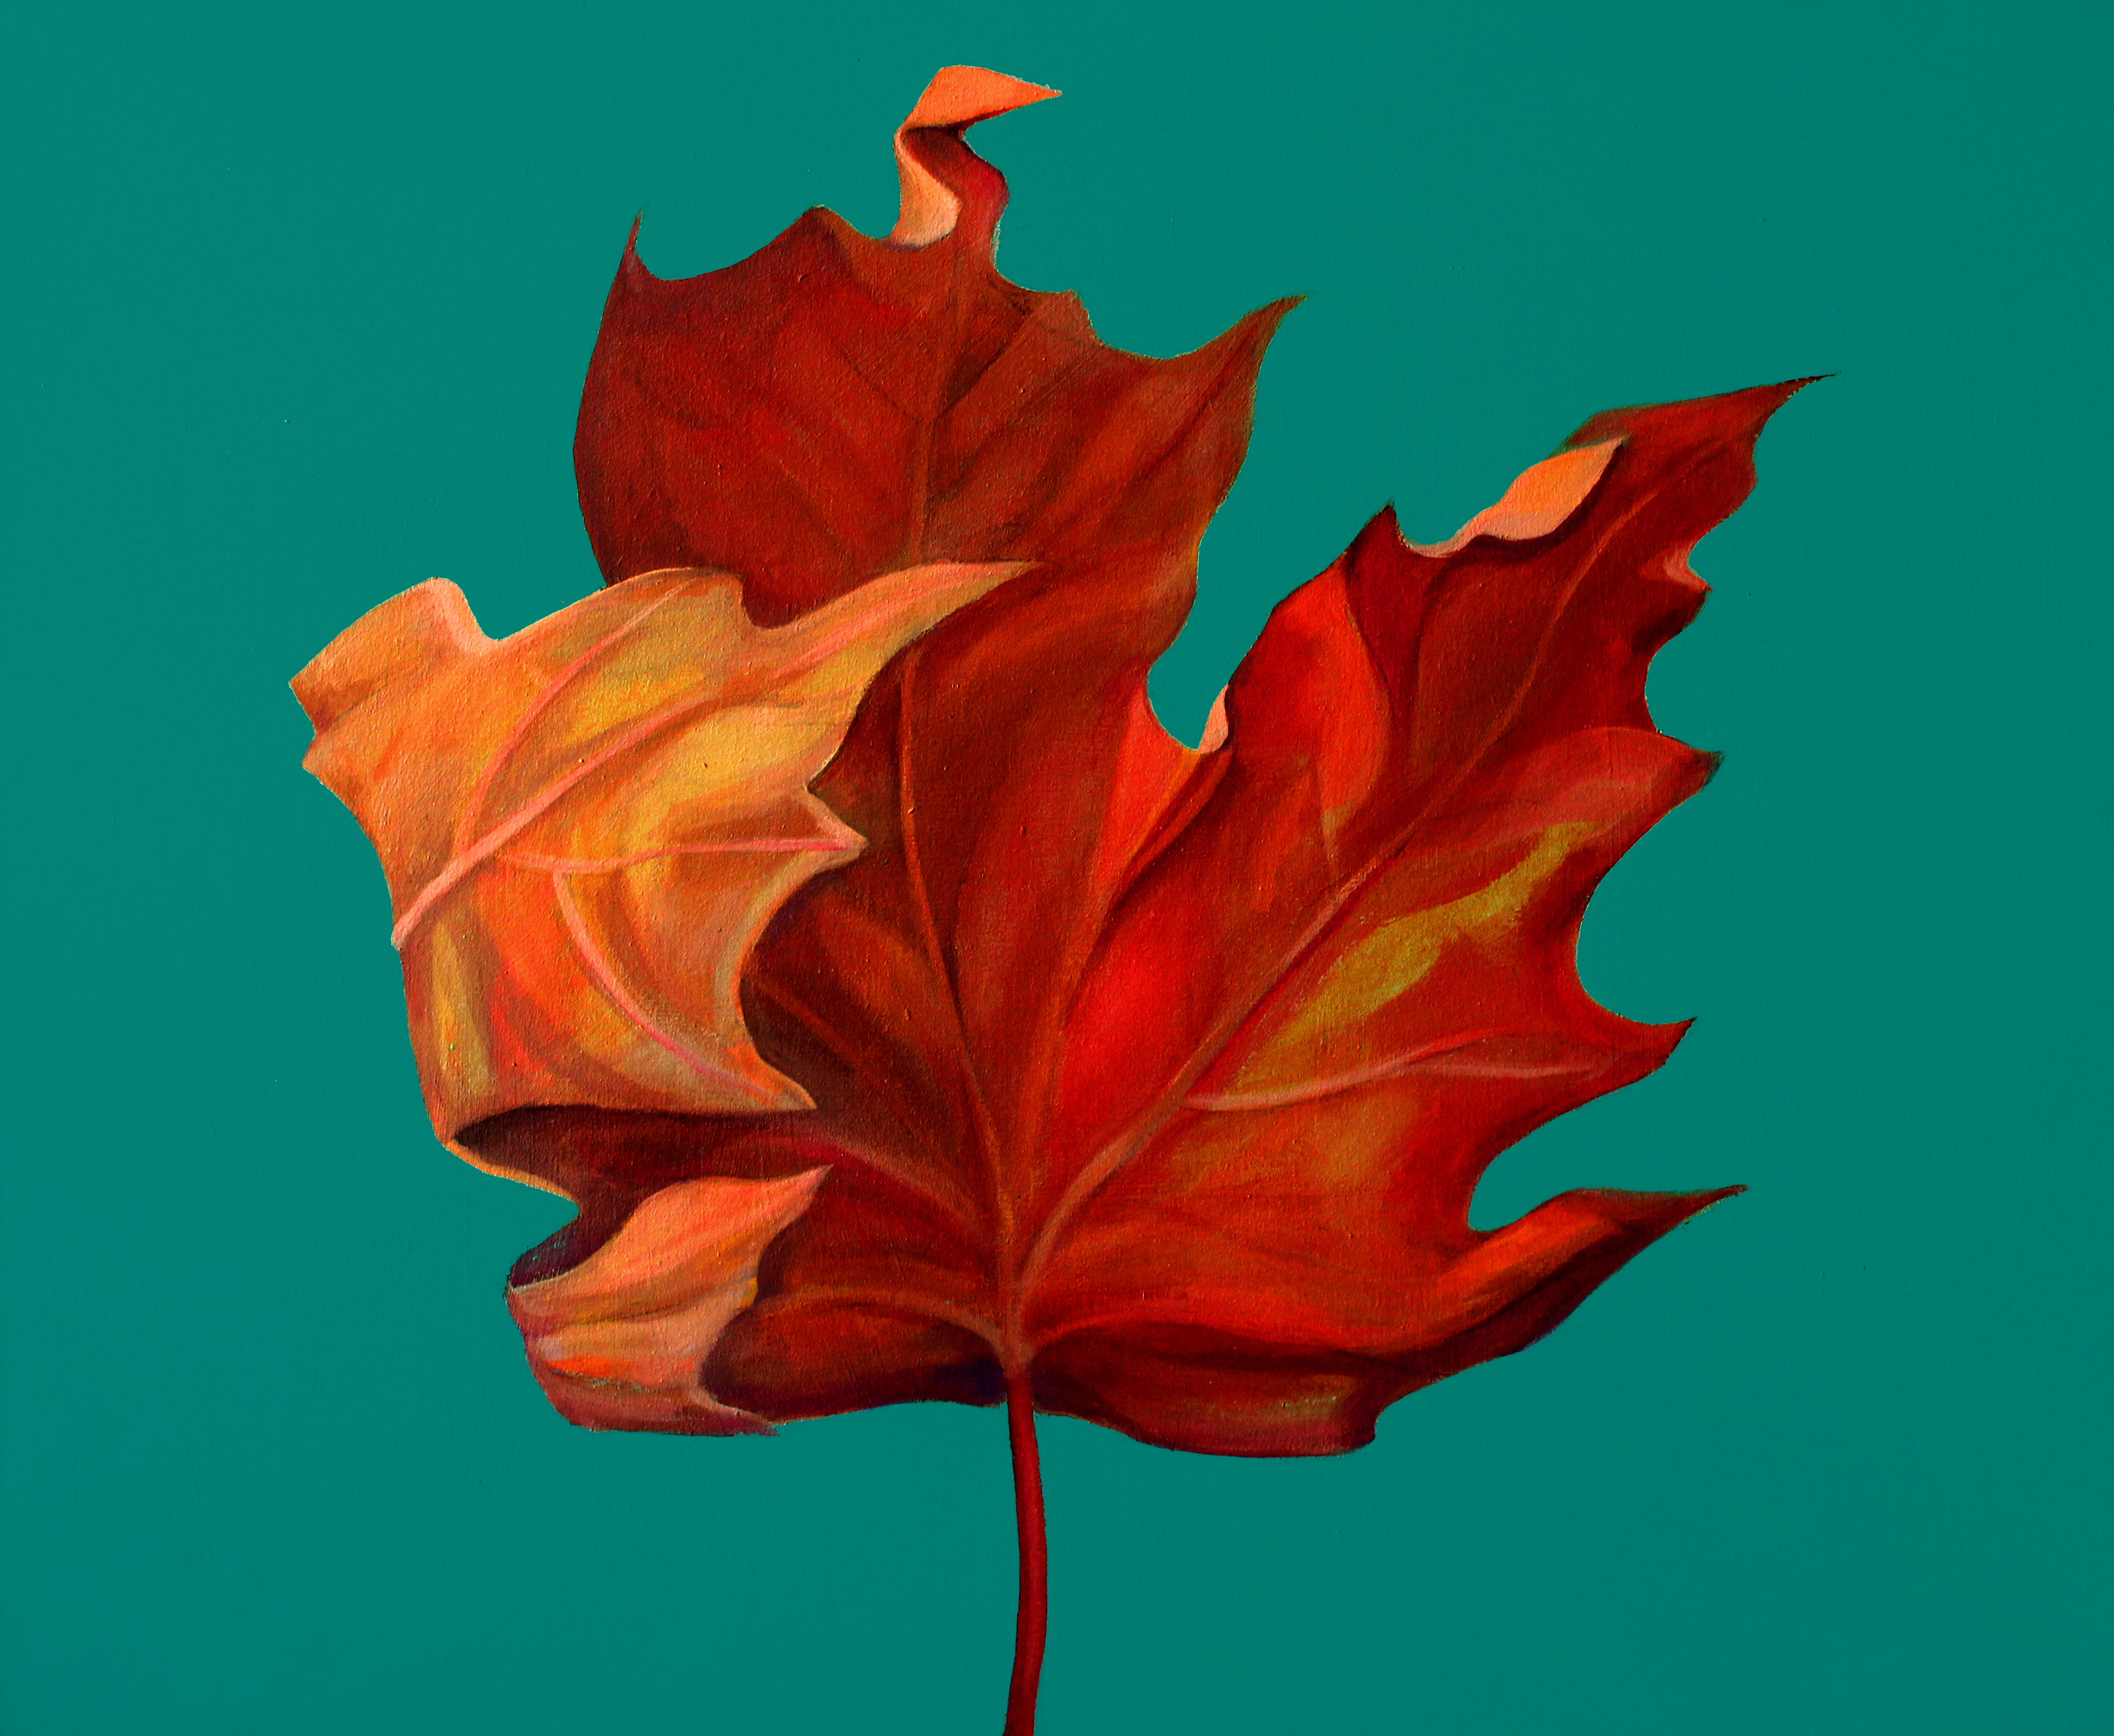 "Leaf" by Scott Gunvaldson, a former student of Charles Beck's and a featured artist in the upcoming exhibition.